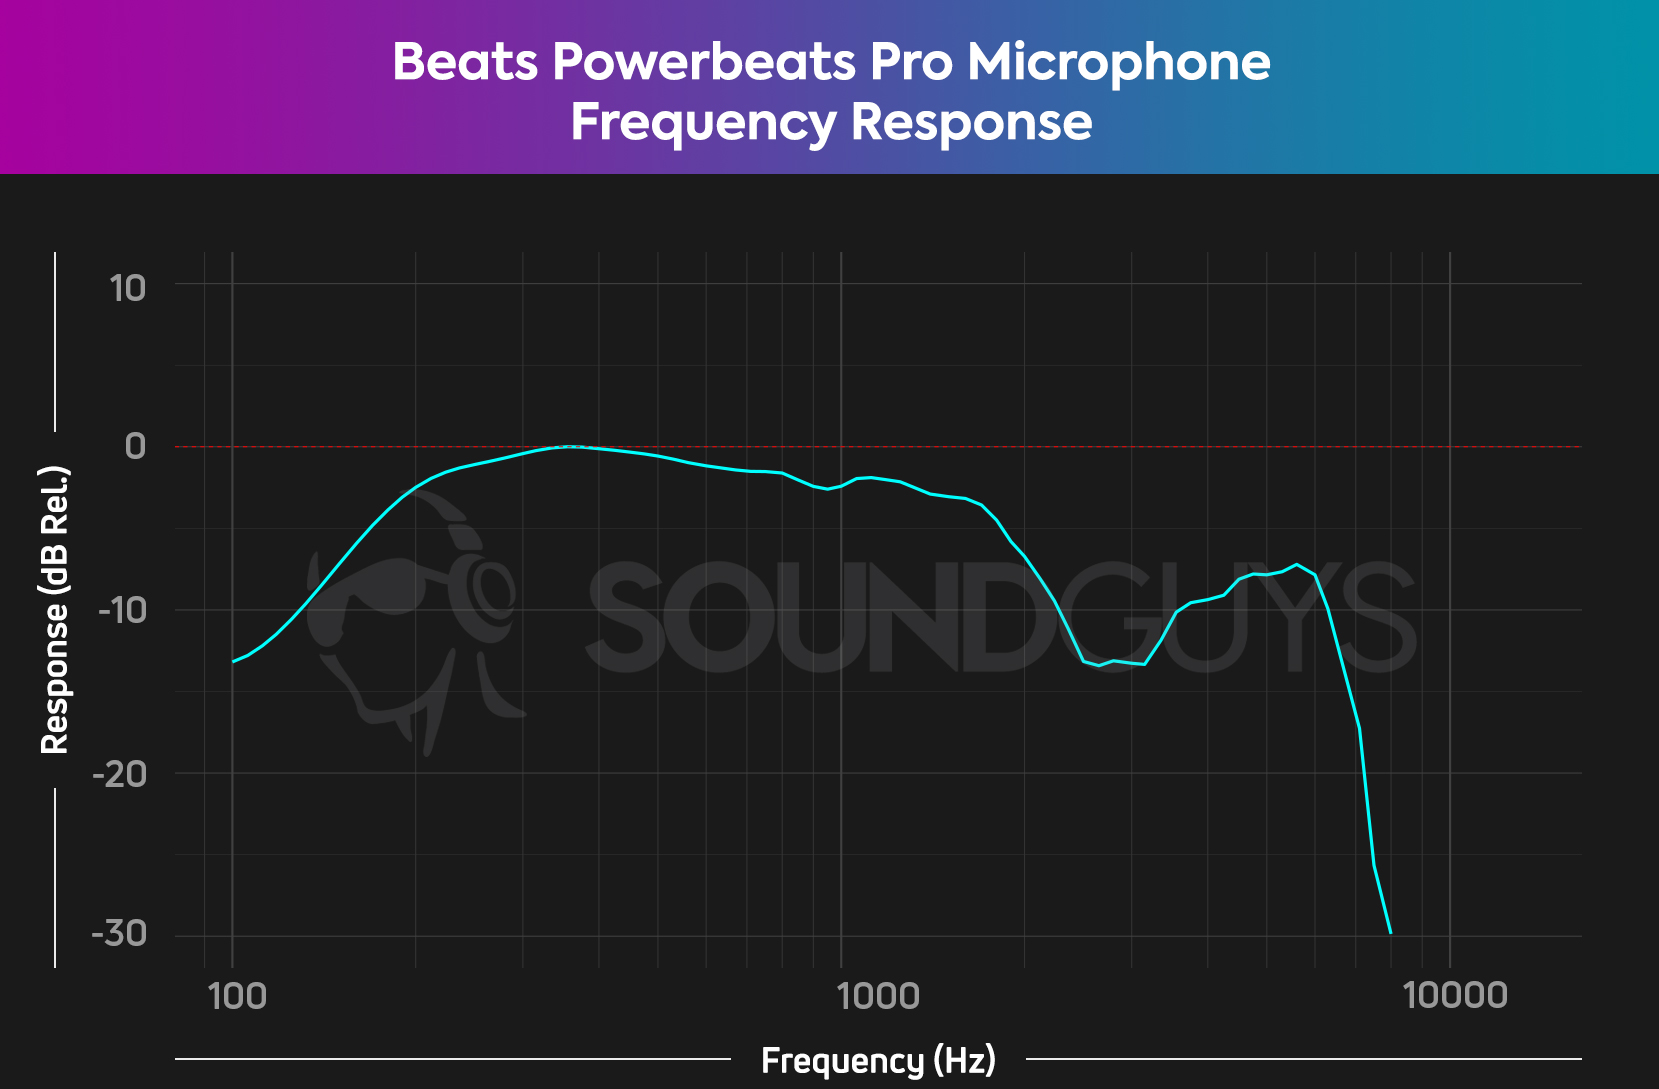 A chart depicts the microphone frequency response of the Beats Powerbeats Pro which has under-emphasis above 1kHz.